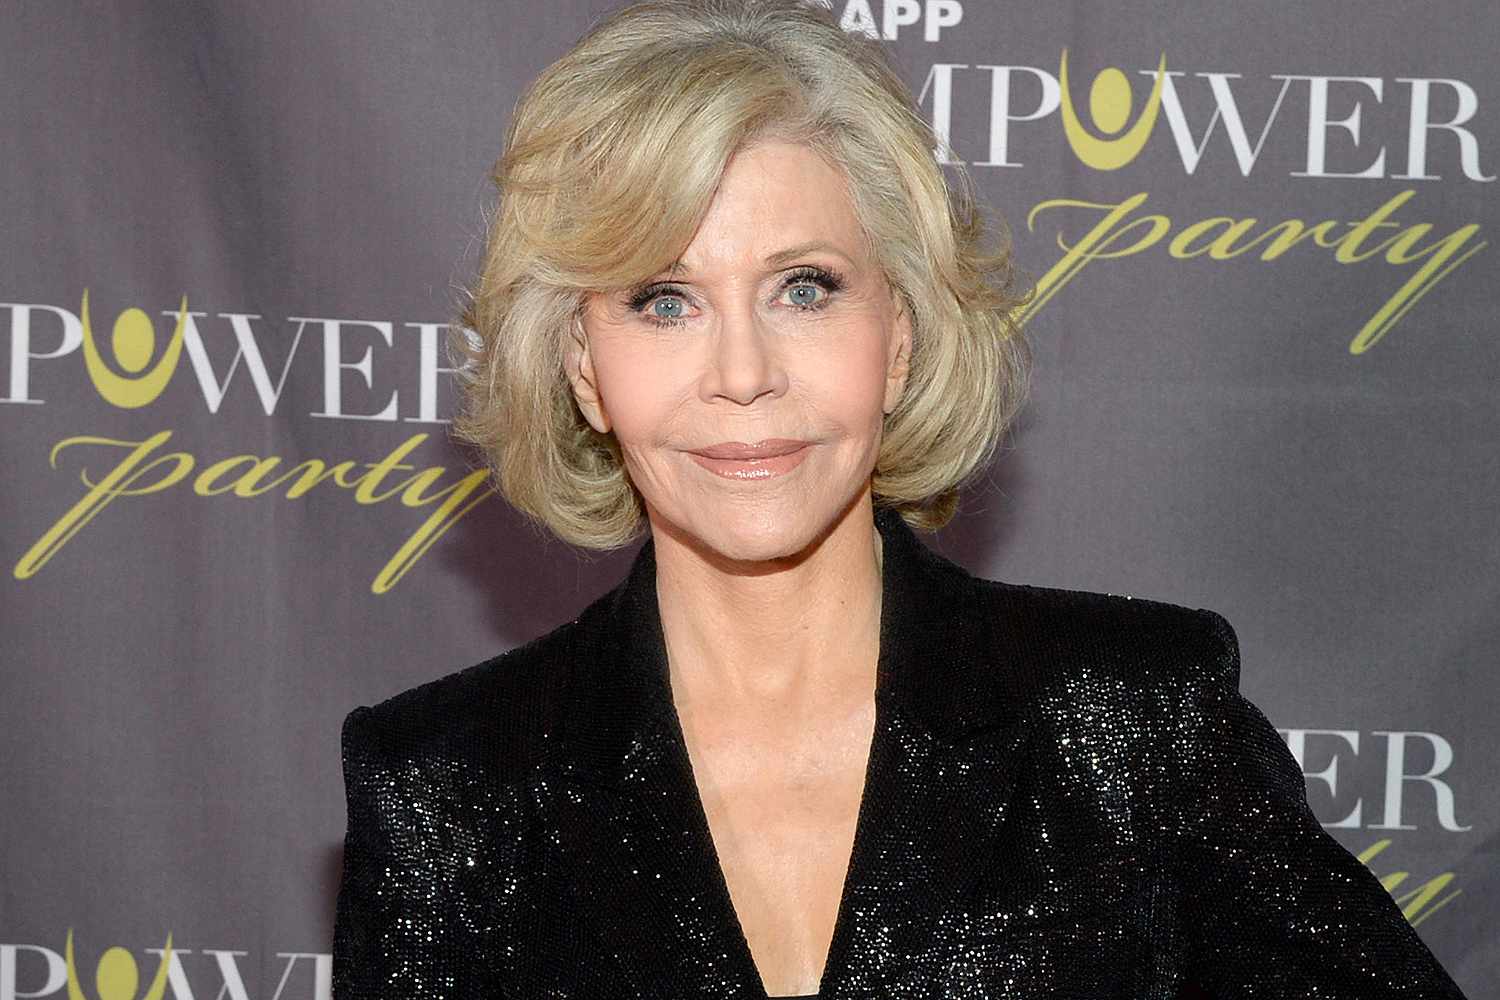 Jane Fonda Opens Up About Getting a Facelift